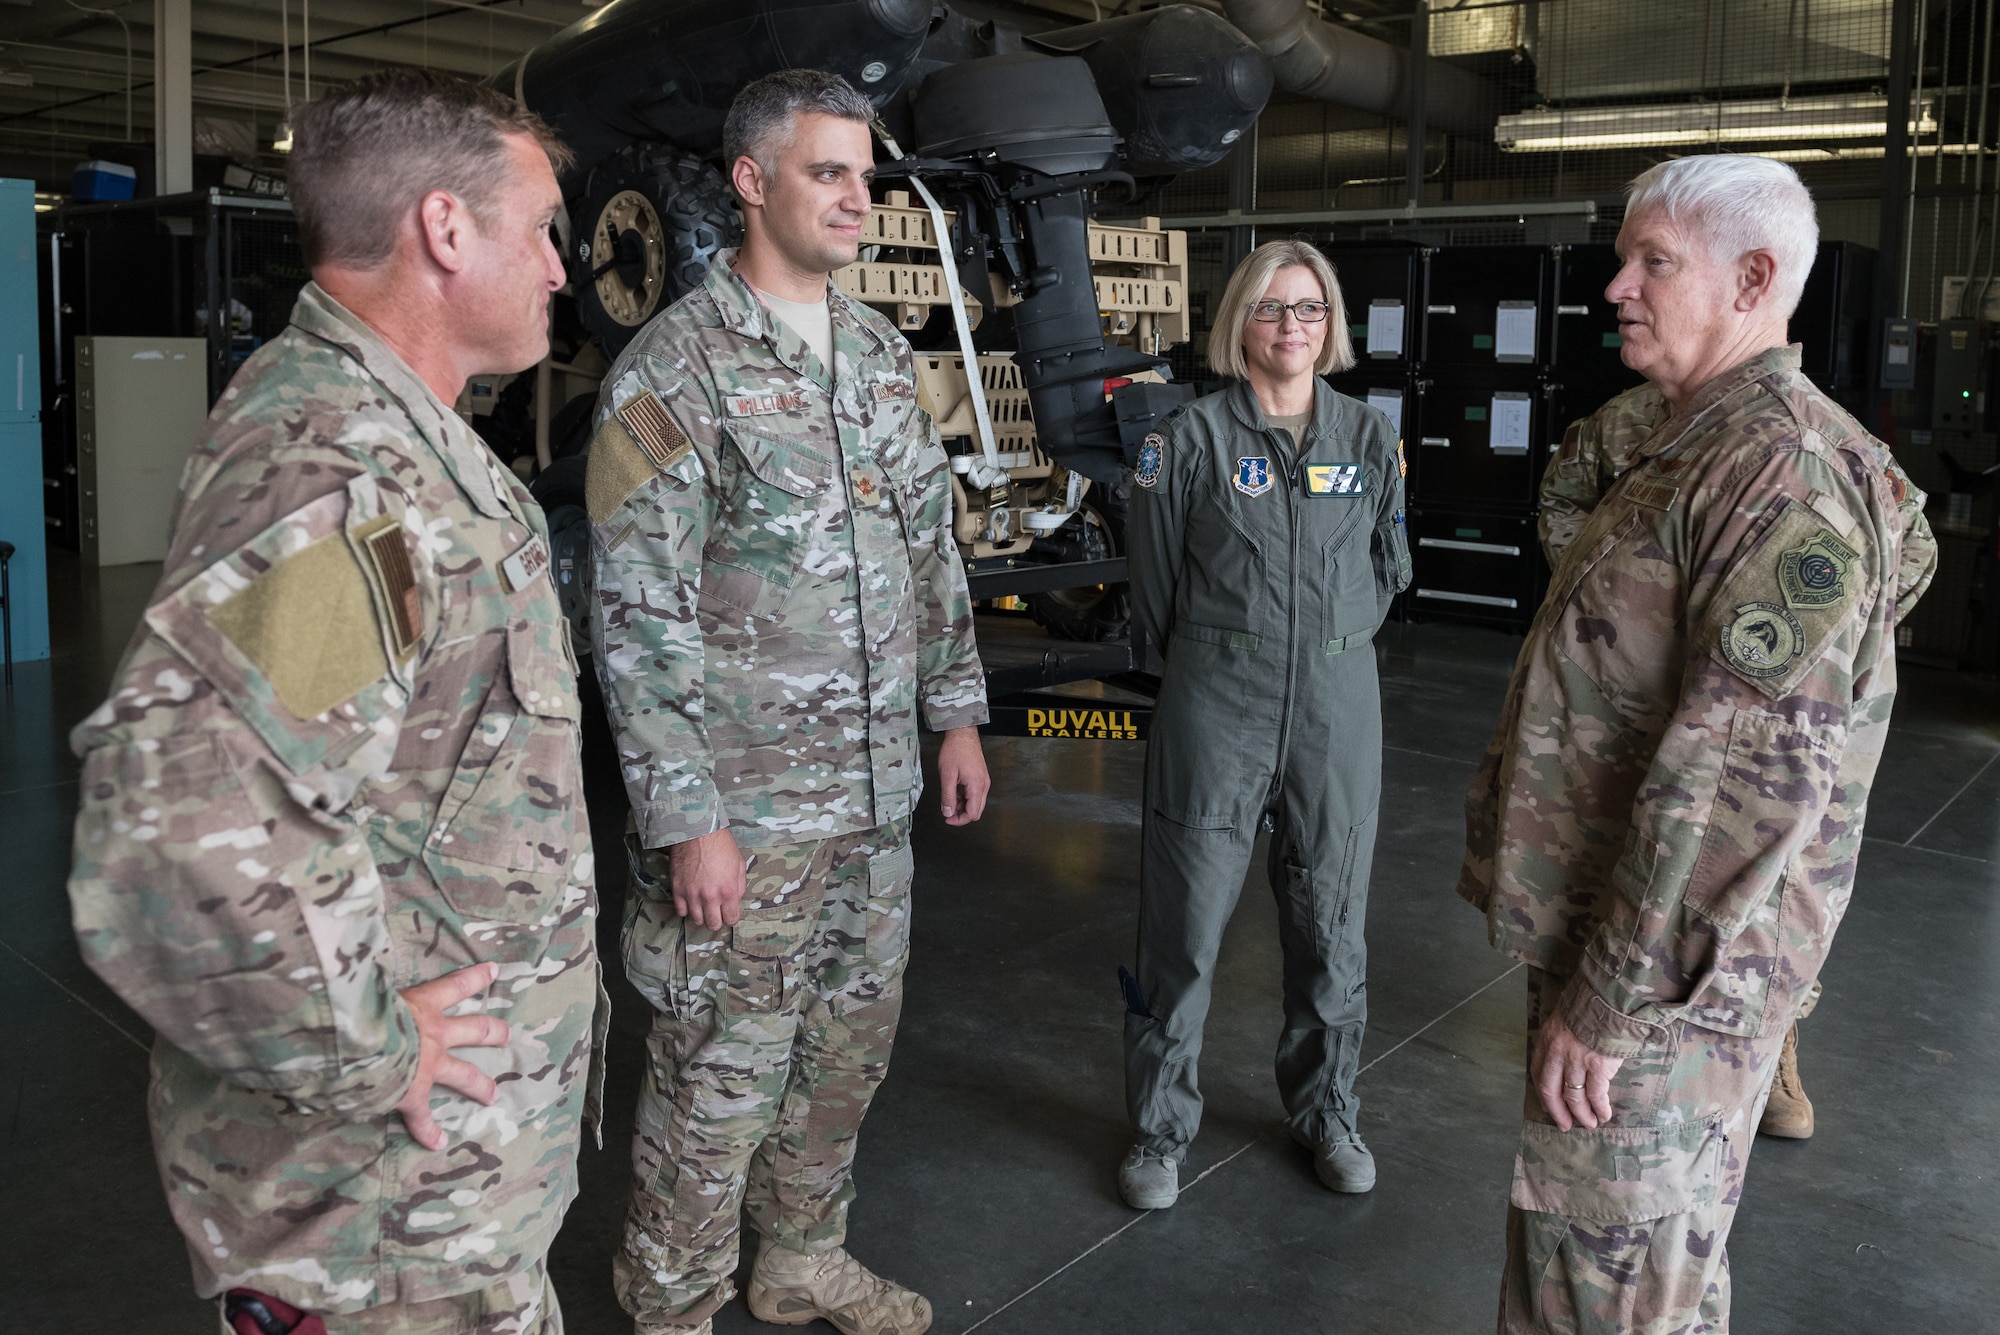 Lt. Gen. L. Scott Rice, director of the Air National Guard, speaks with members of the 123rd Special Tactics Squadron and 165th Airlift Squadron during a tour of the Kentucky Air National Guard Base in Louisville, Ky. Aug. 10, 2019. Rice also conducted a town hall meeting and answered questions posed by Kentucky Air Guardsmen. (U.S. Air National Guard photo by Dale Greer)